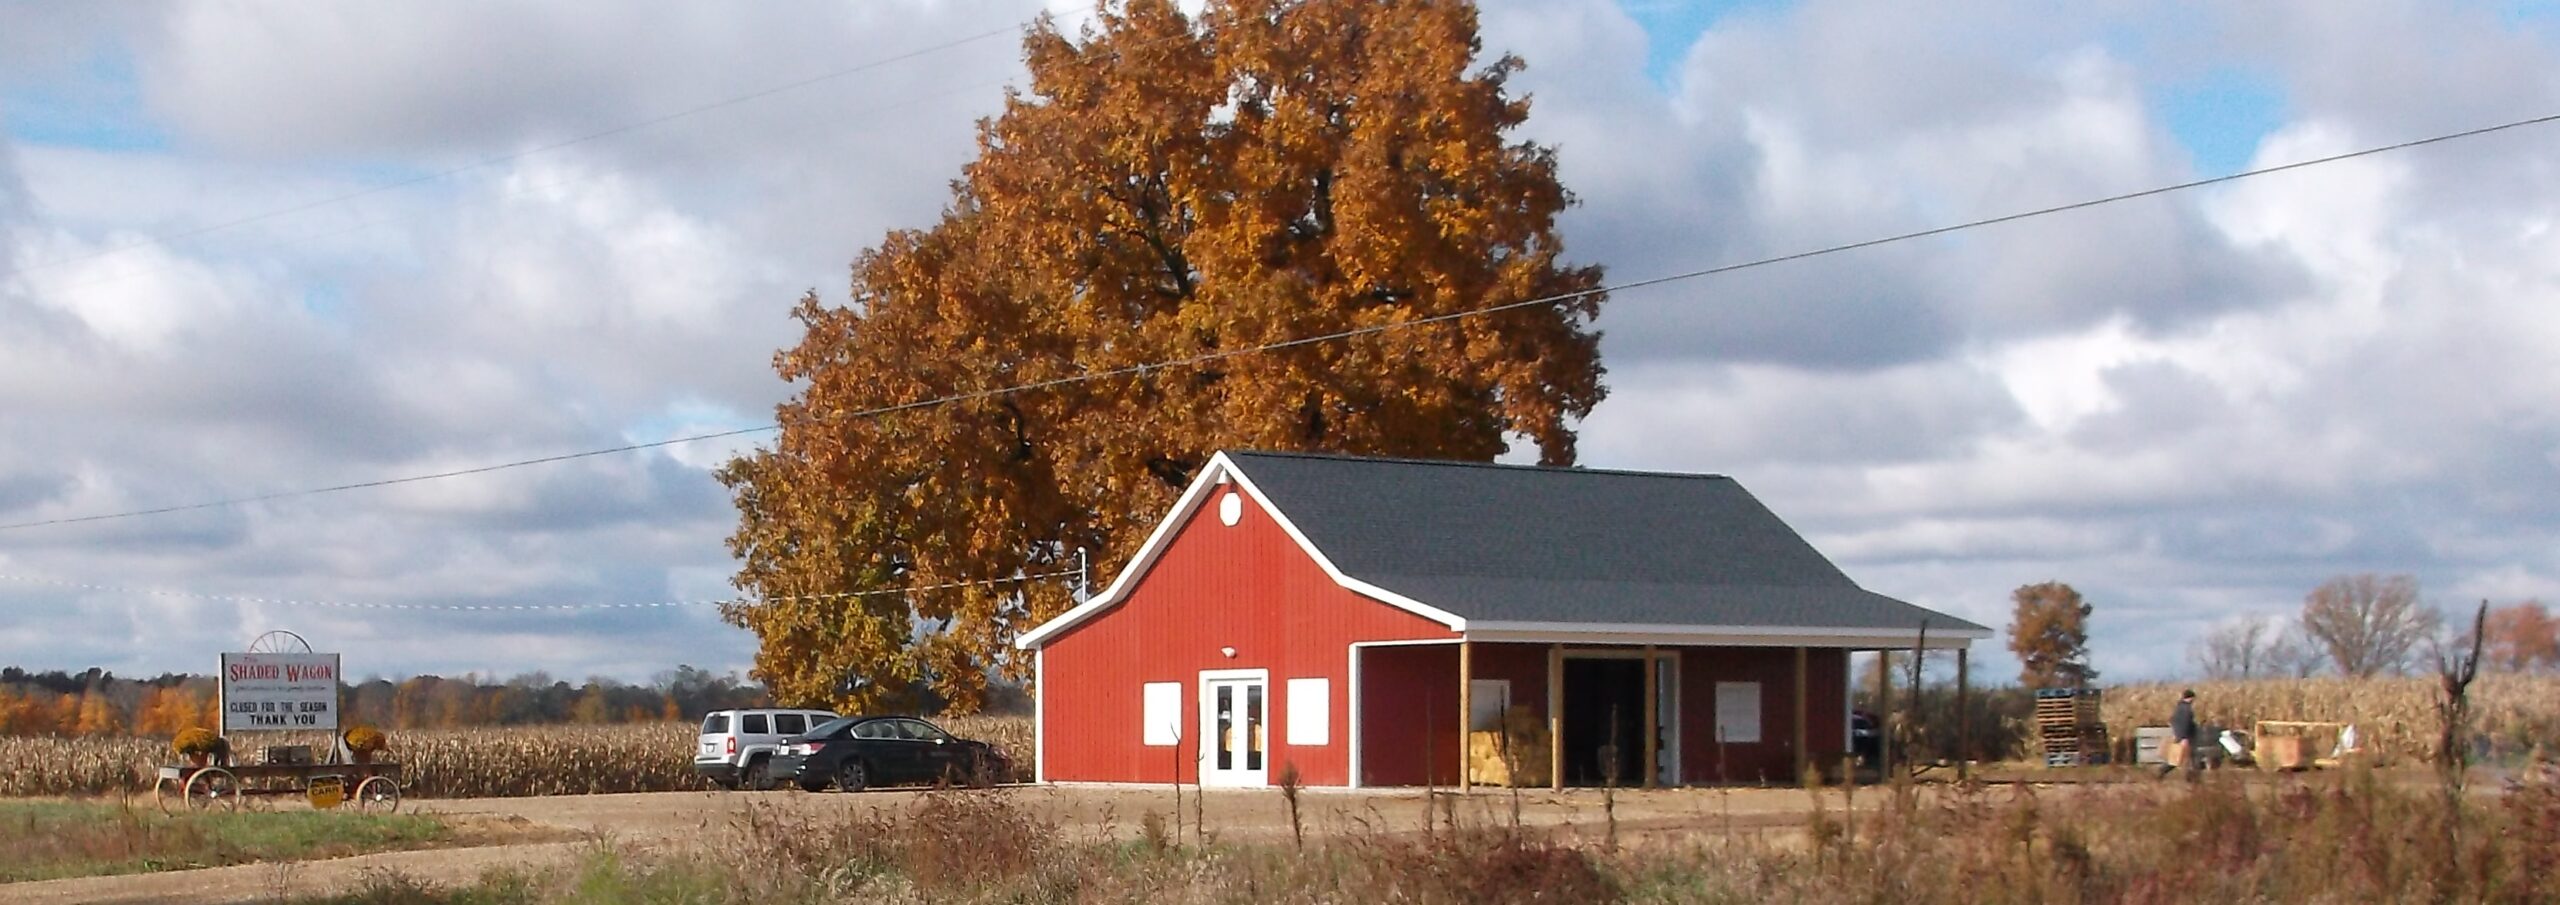 A vibrant autumn scene with a red barn, a large golden tree, and a sign advertising pumpkins and squash for sale, beside which stands a plumber examining the farm's irrigation system.